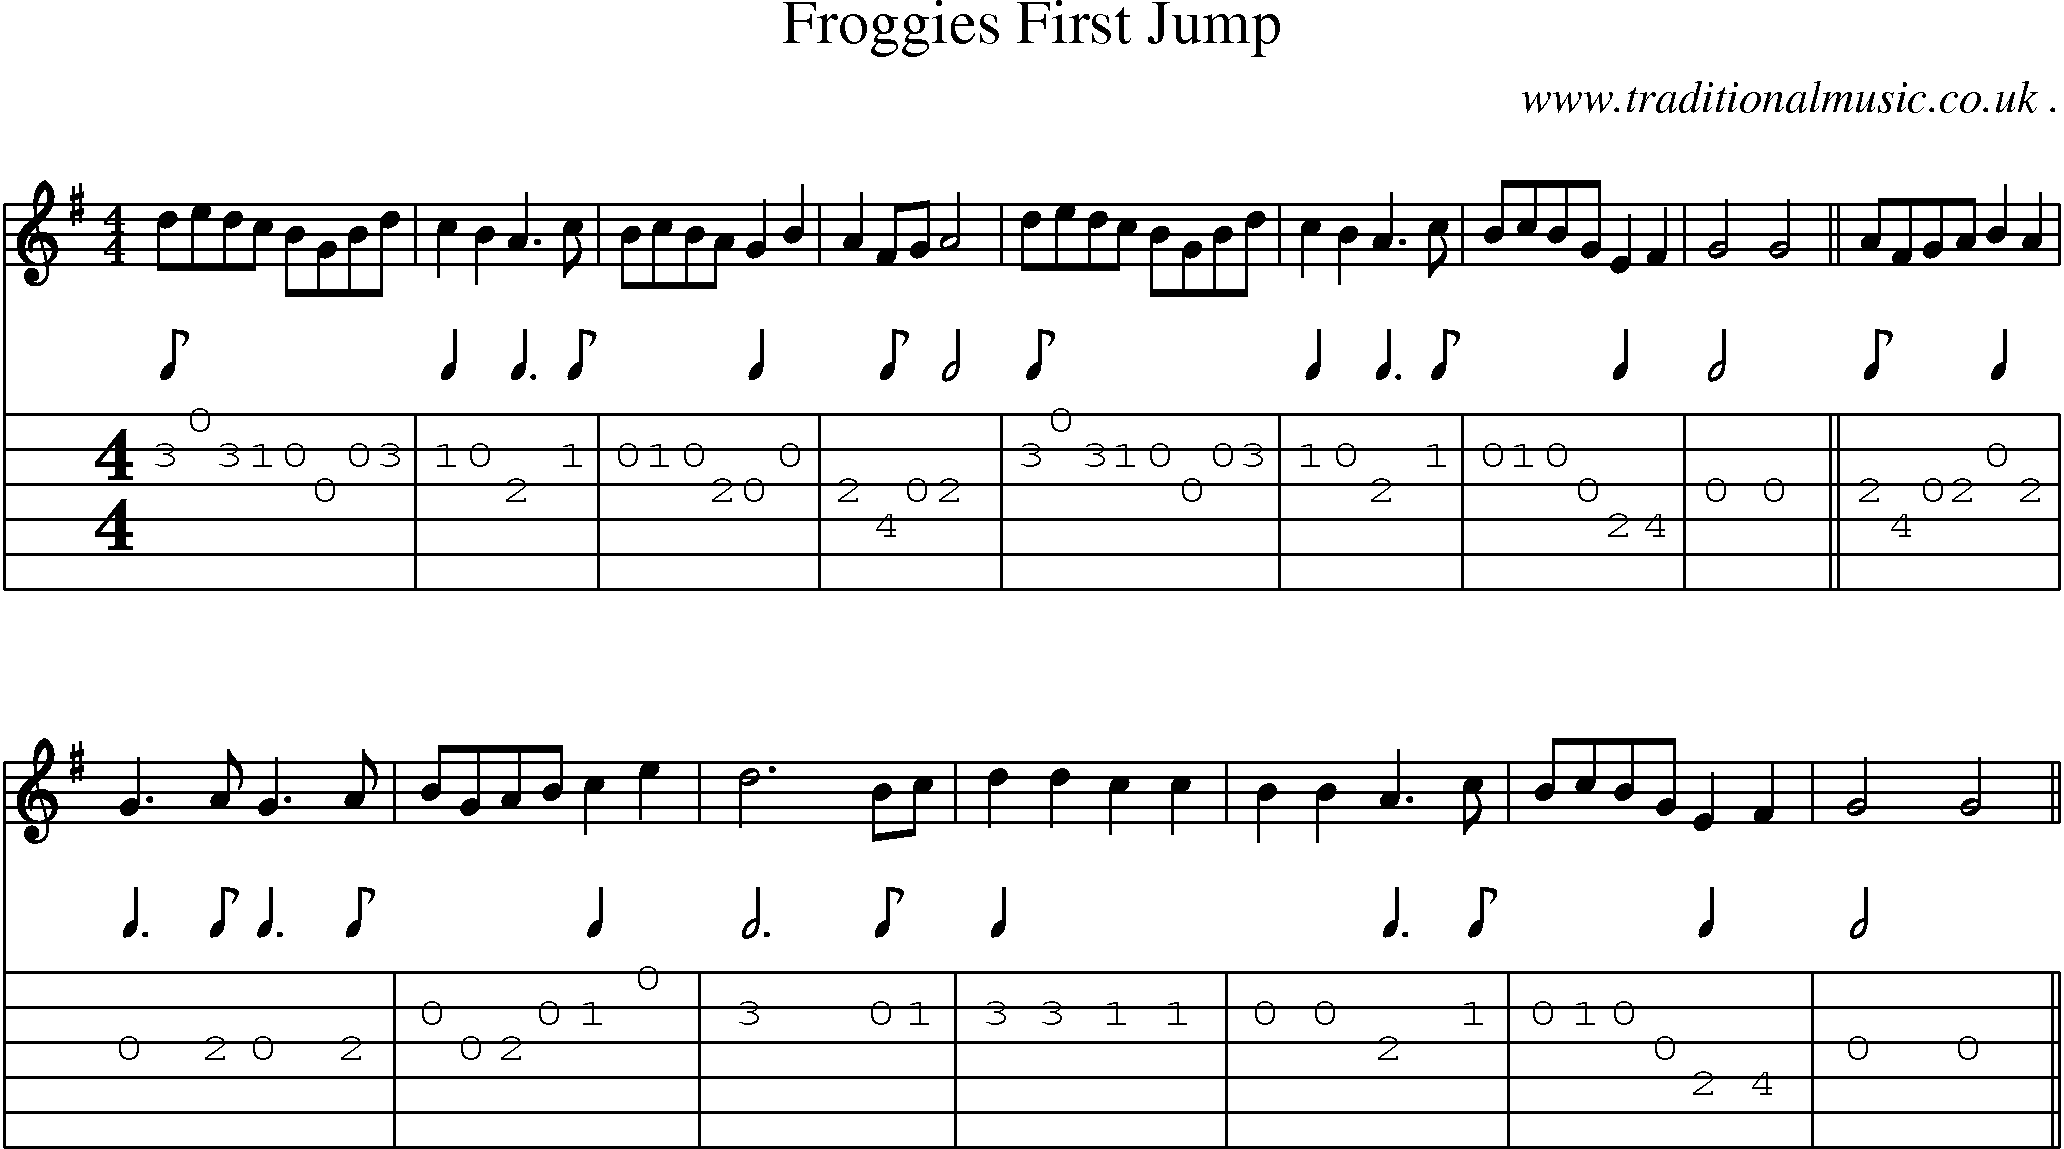 Sheet-Music and Guitar Tabs for Froggies First Jump